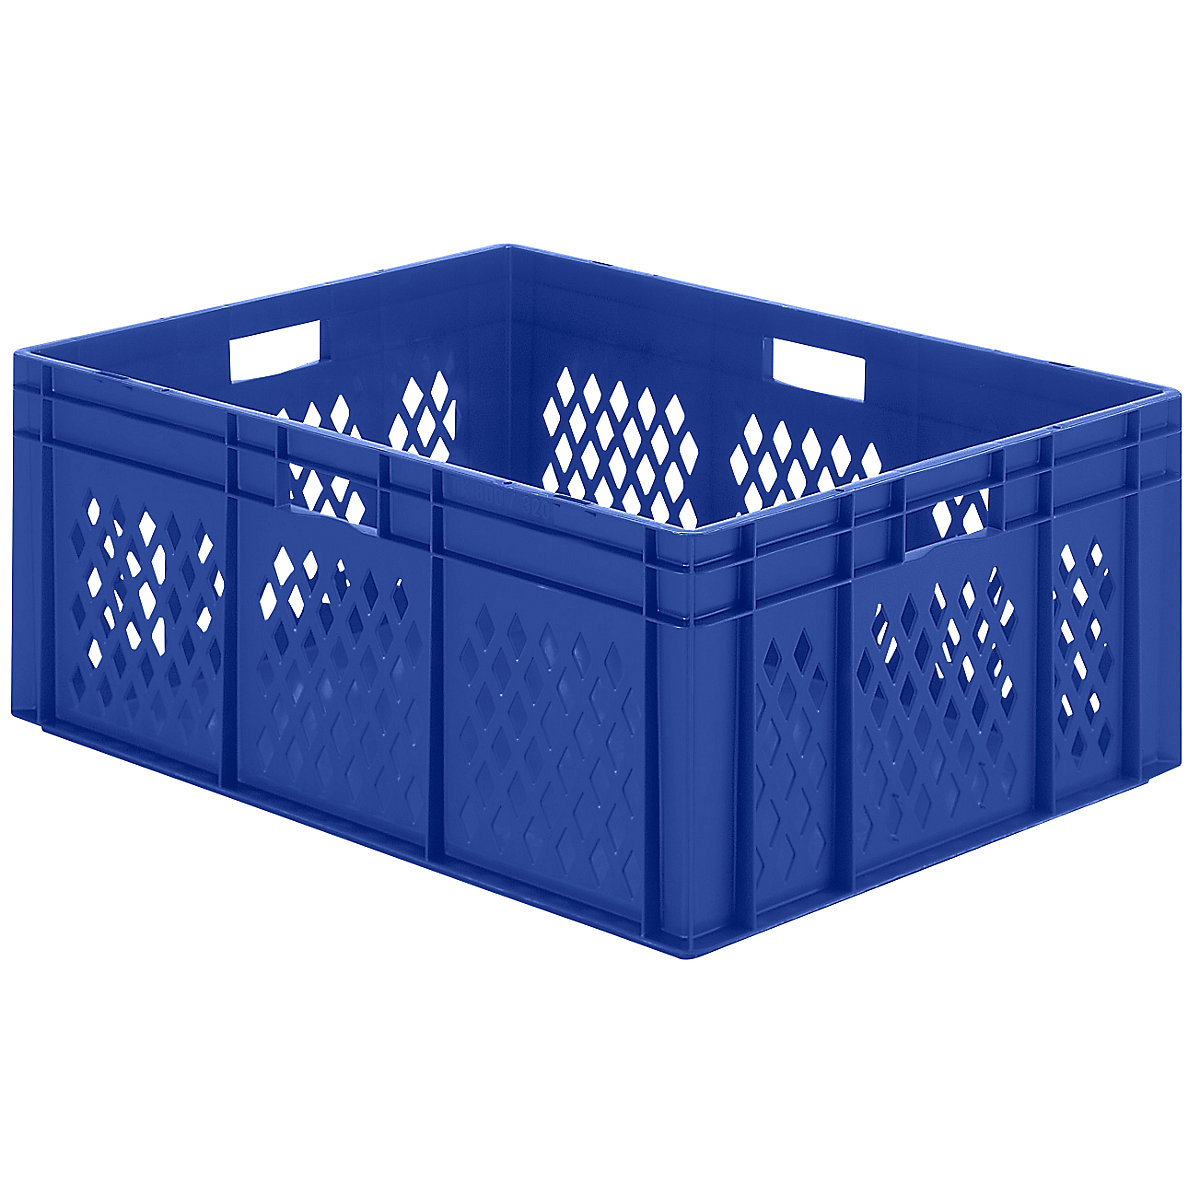 Euro stacking container, perforated walls, closed base, LxWxH 800 x 600 x 320 mm, blue, pack of 2